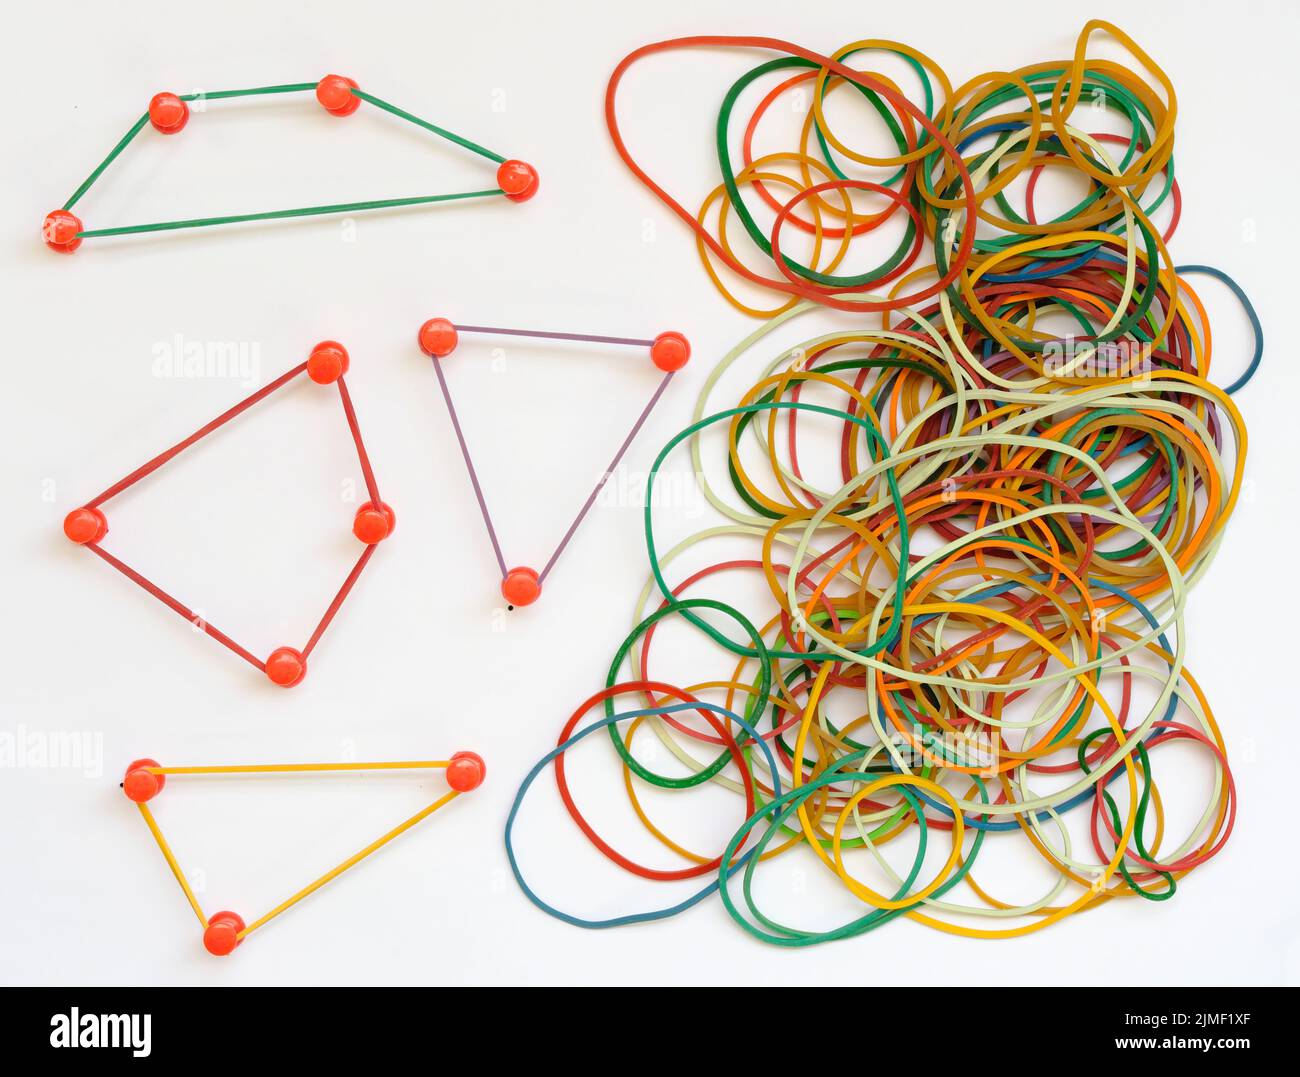 Business metaphor,networking,innovation,idea,consulting, human resources concept with drawing pins and rubber bands, some forming network structures b Stock Photo